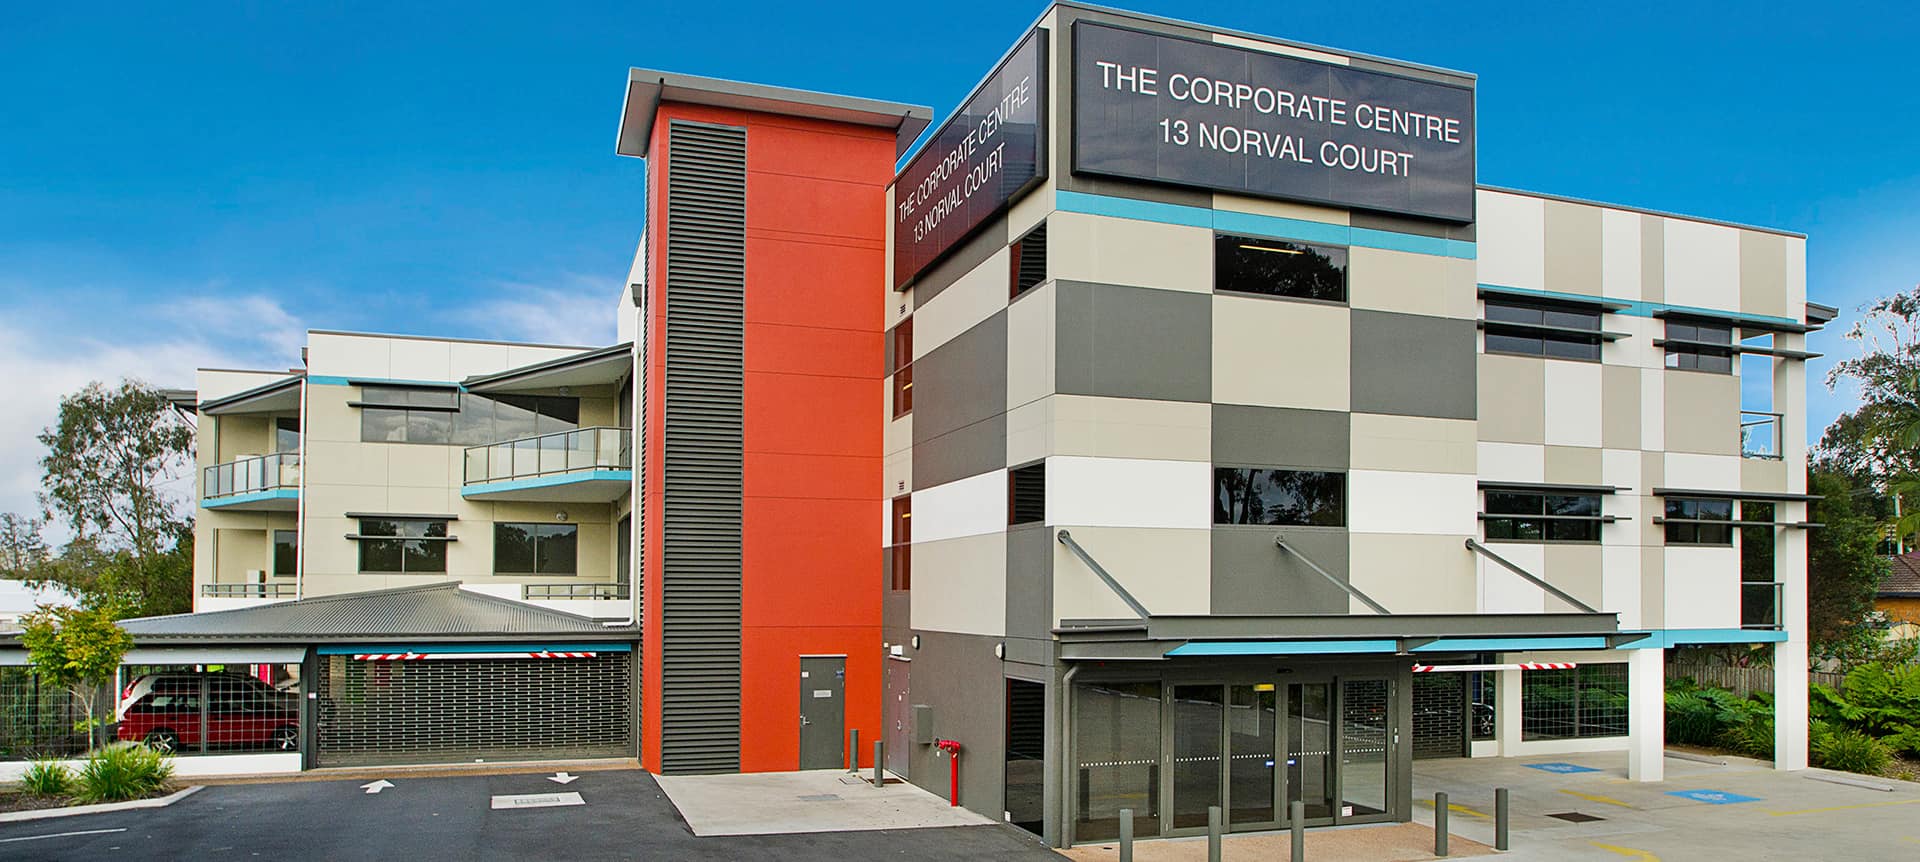 Image of The Corporate Centre Building